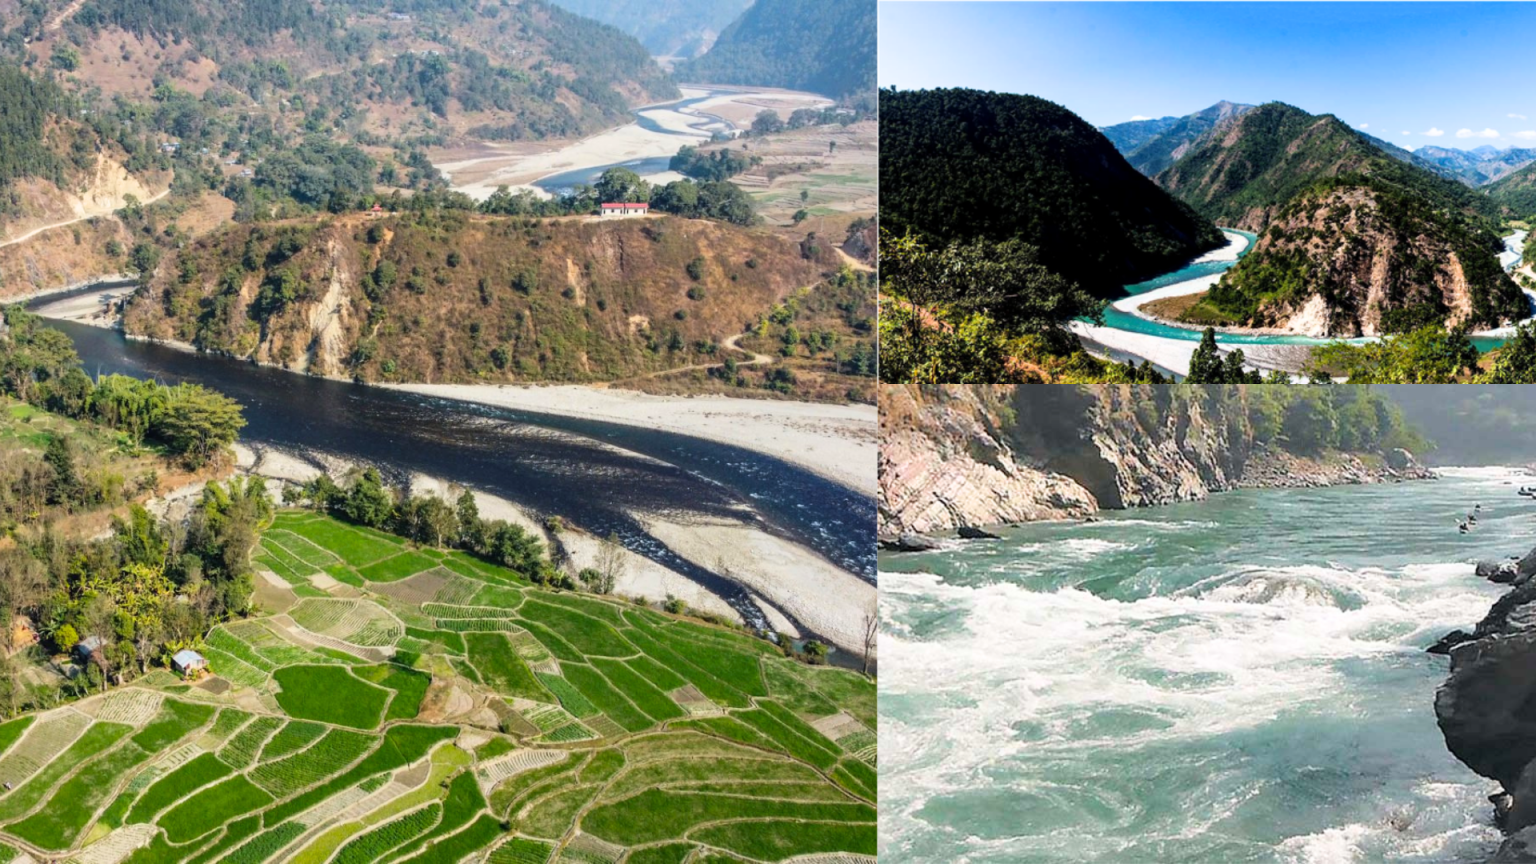 The government is not serious about the construction of the reservoir hydropower project